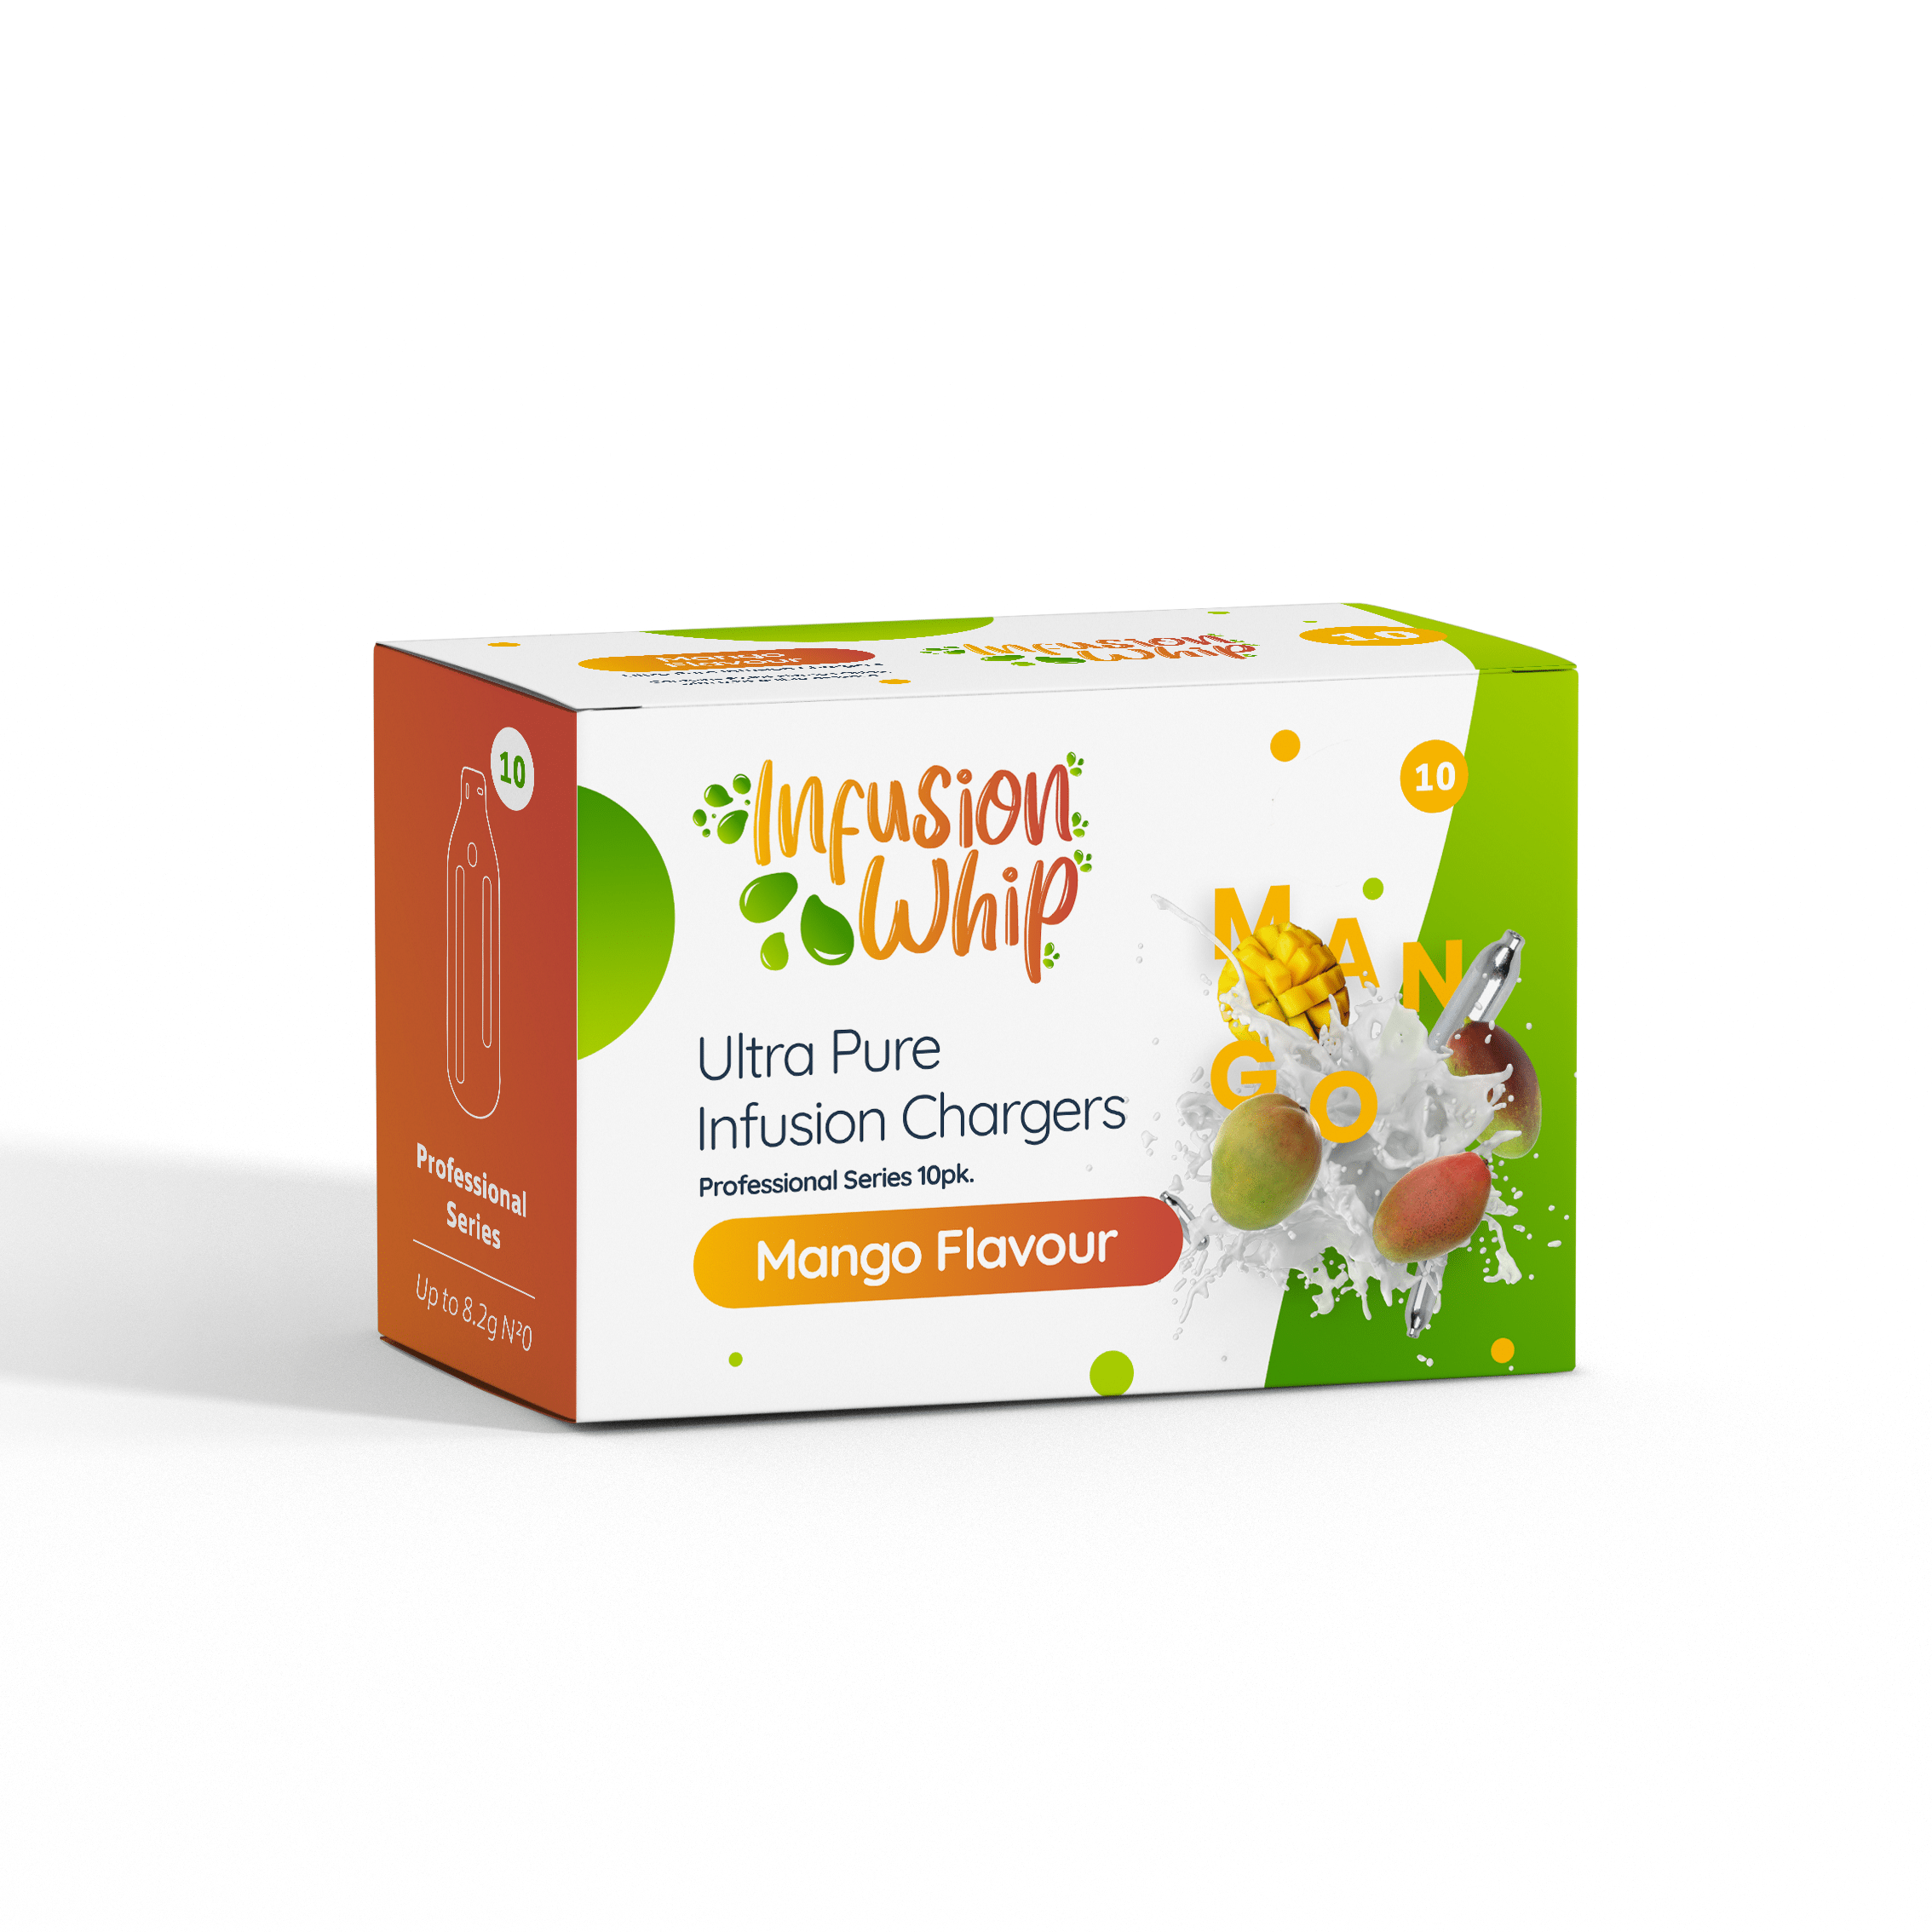 New Infusionwhip Mango Infusion Chargers 8.2g - 10pks